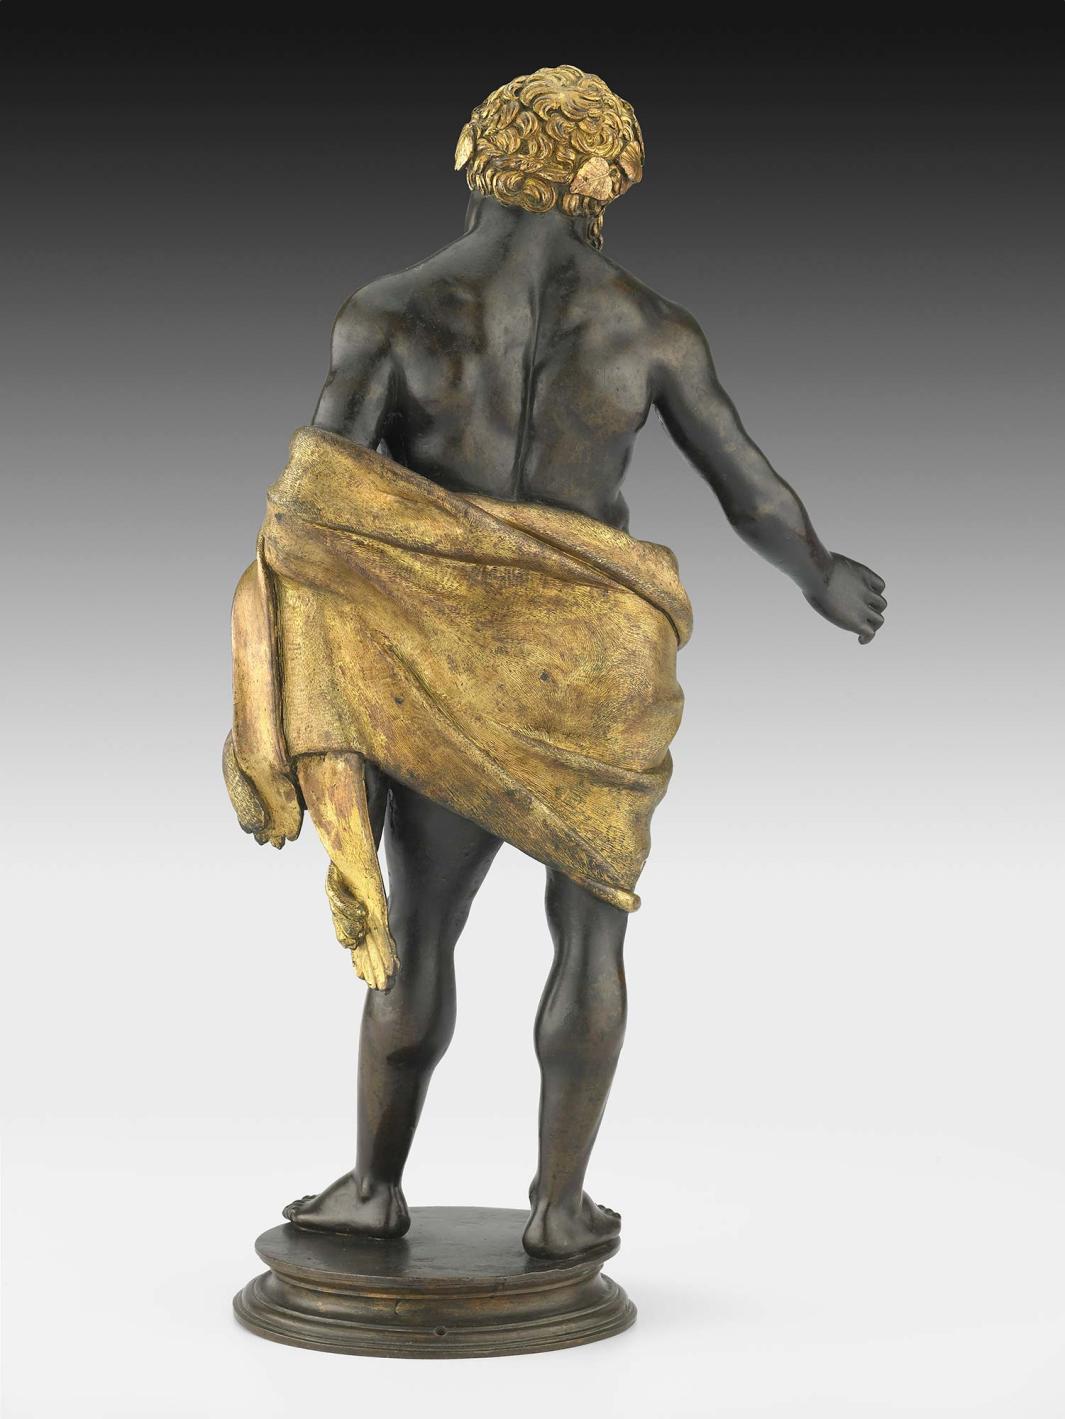 reverse of bronze sculpture depicting Hercules, with partial gilding and silvering